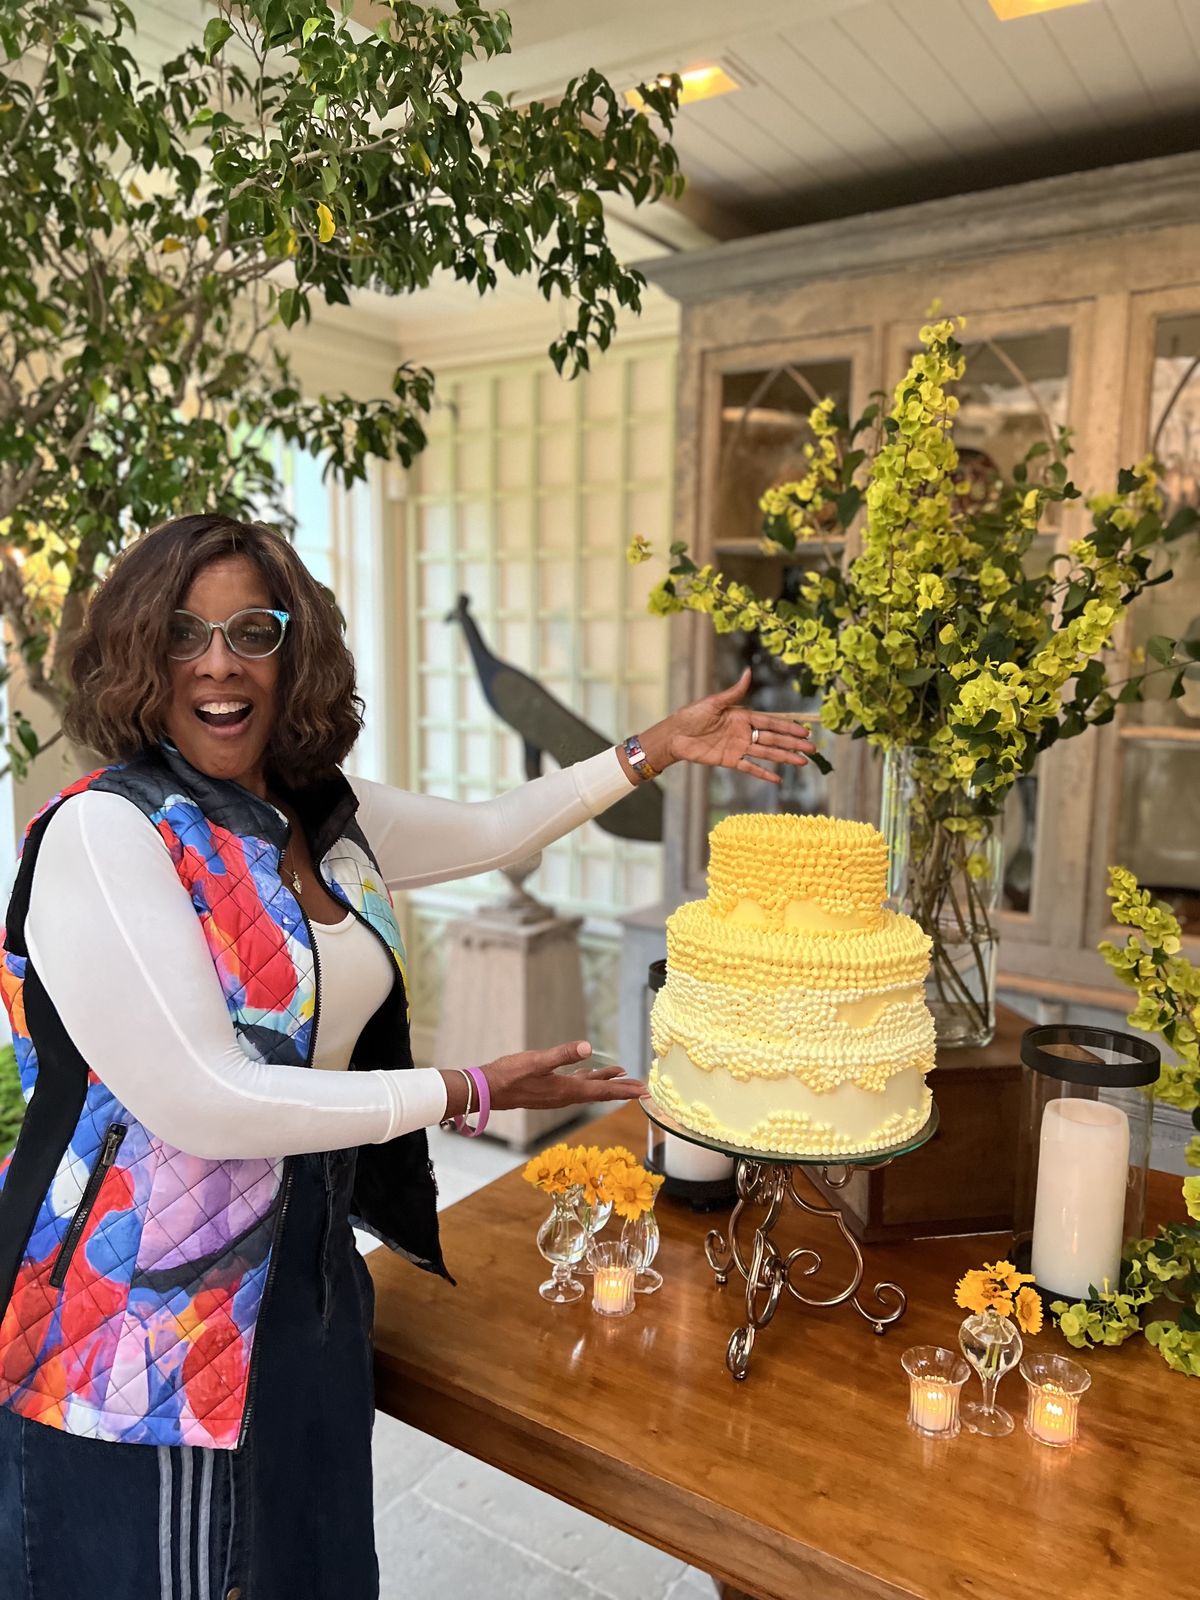 gayle king with her birthday cake